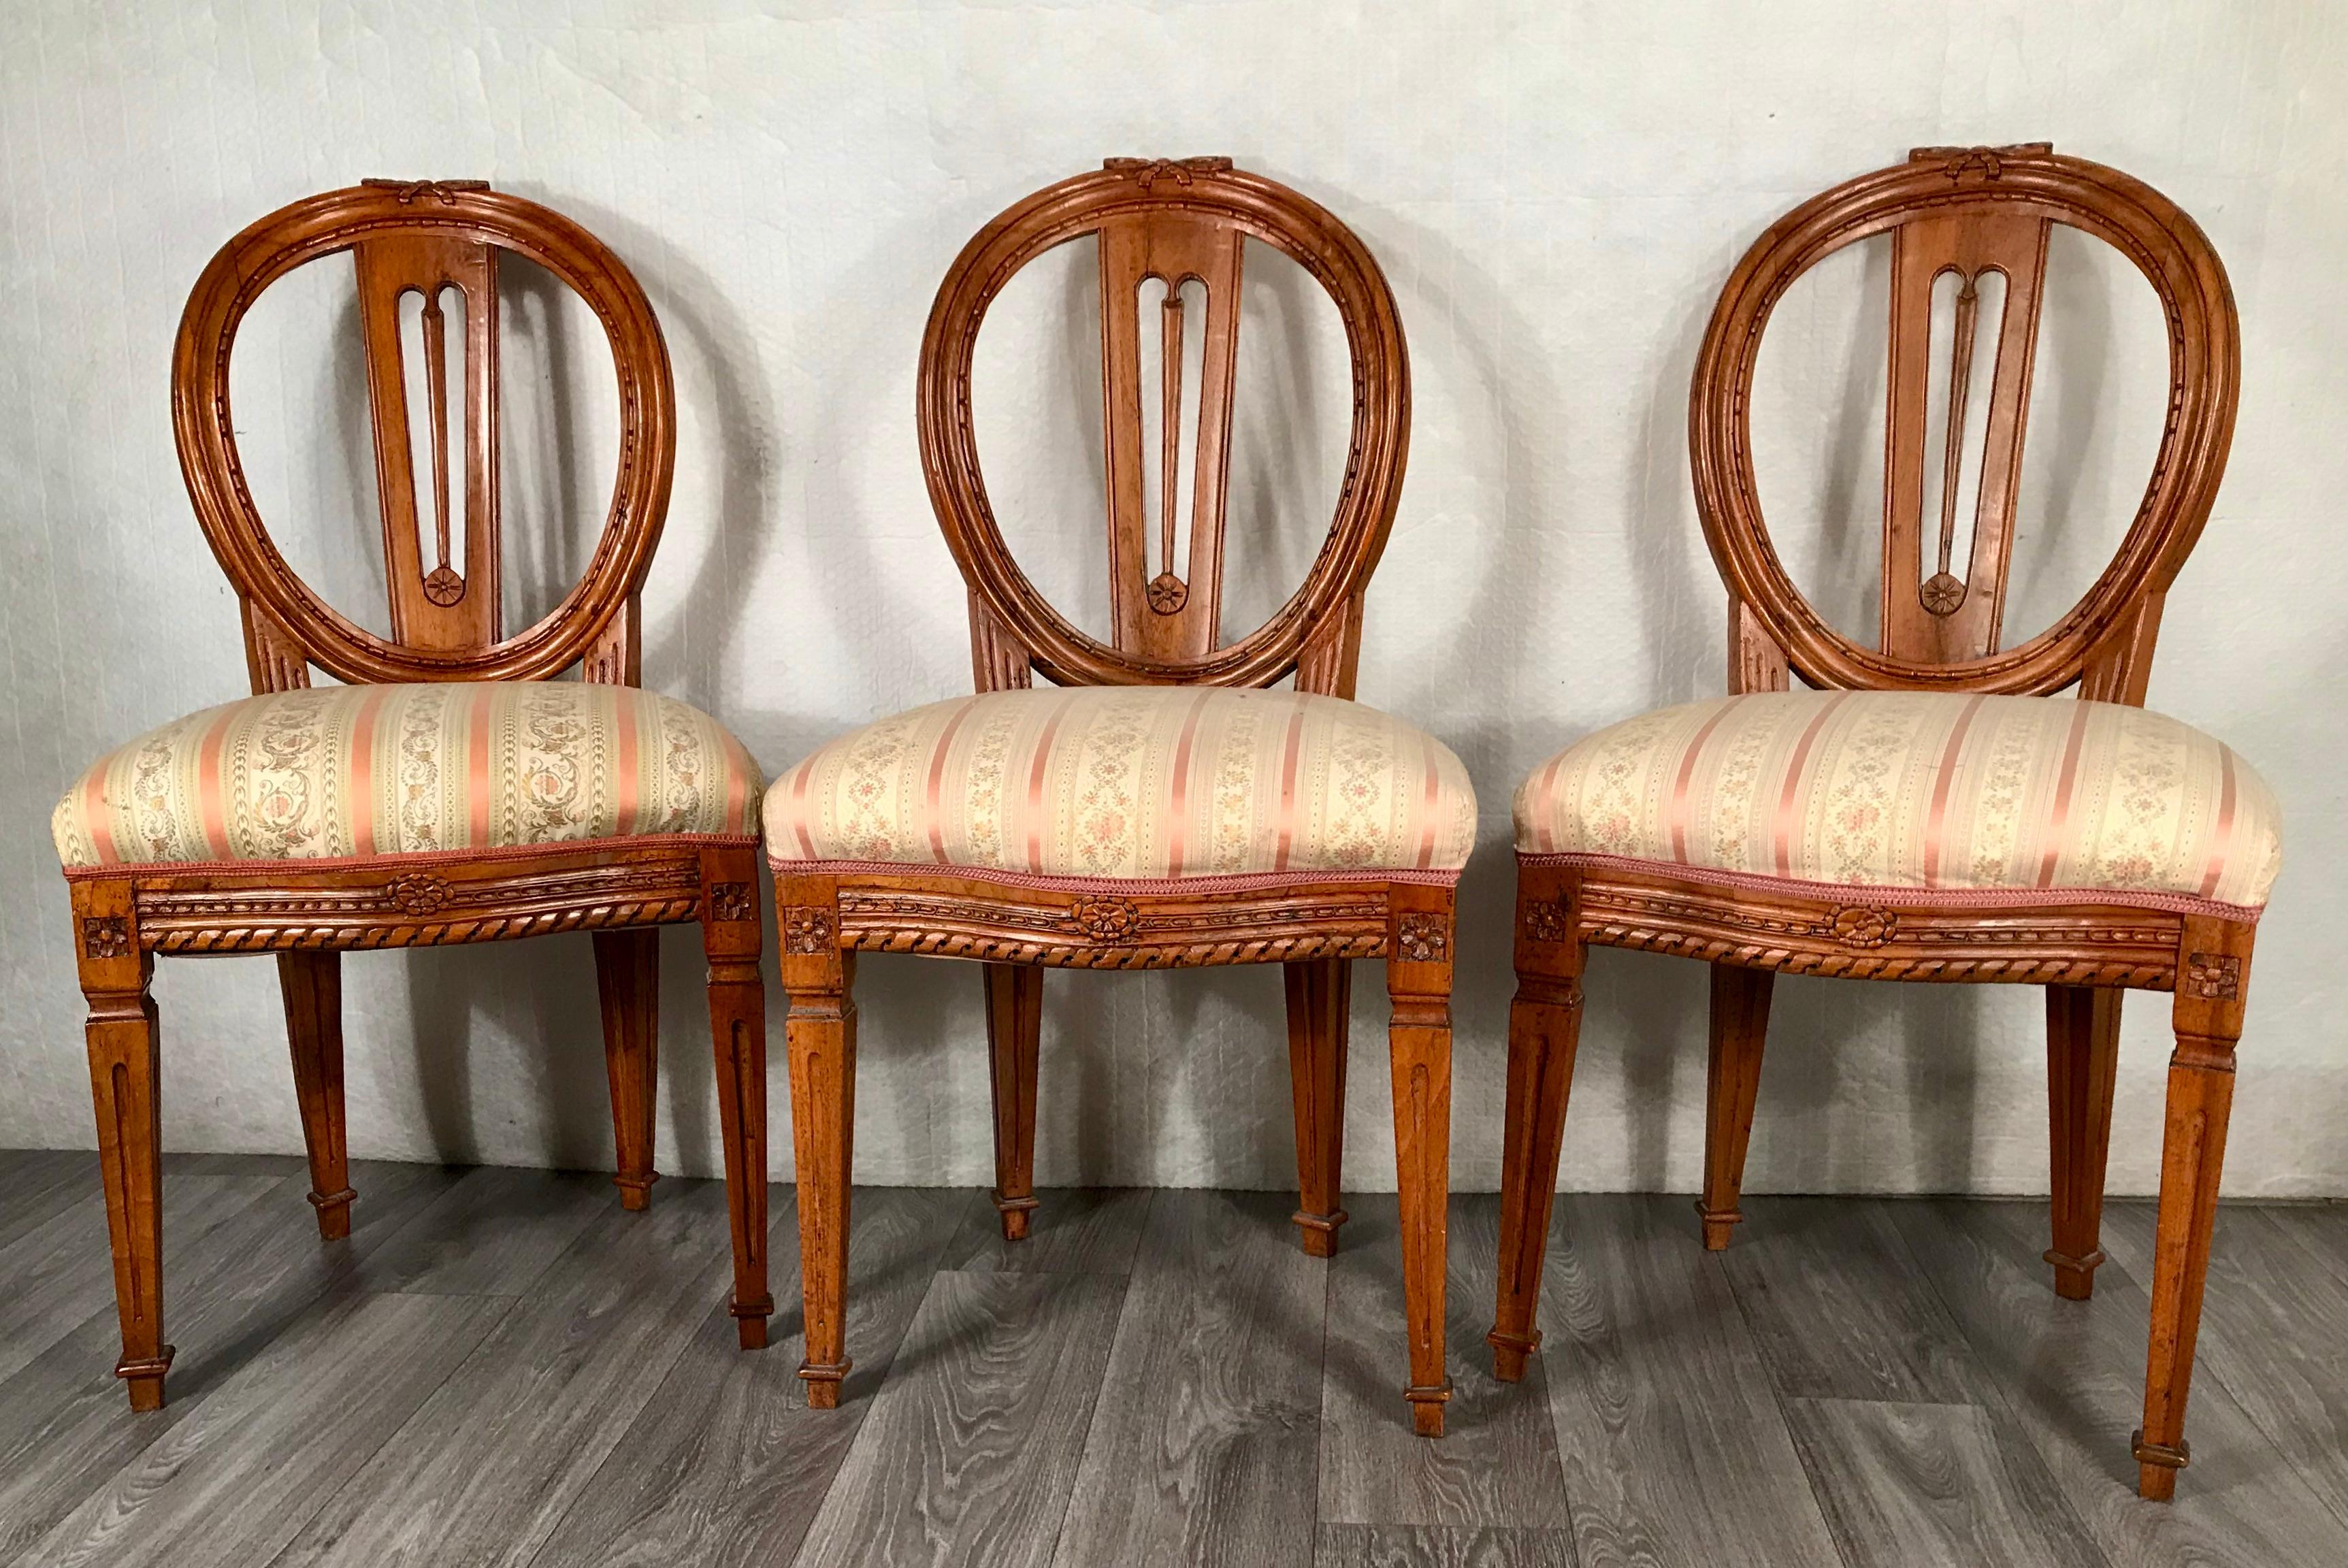 Set of three Louis XVI chairs, Germany 1780-1800. The chairs are made of walnut, finely carved with typical Louis XVI motifs on backs, legs and the frames of the seats. The oval shaped backs have a pretty open work decoration. The chairs are in in